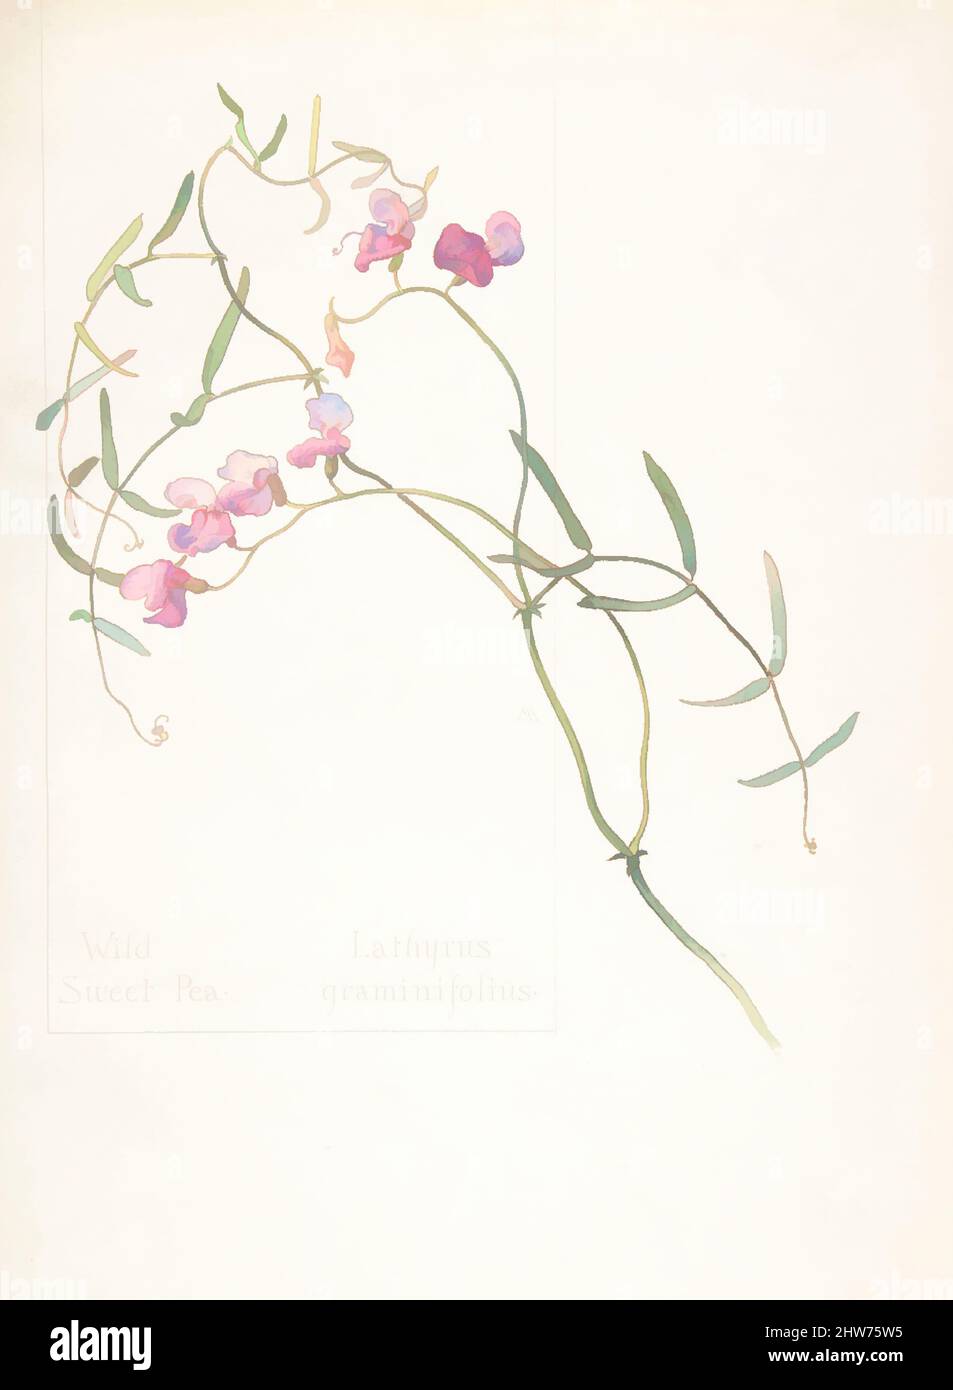 Art inspired by Wild Sweet Pea, Lathyrus graminifolius, May 12, 1912, Watercolor and brown ink over graphite, with page design indicated in graphite, sheet: 13 11/16 x 9 15/16 in. (34.8 x 25.2 cm), Drawings, Margaret Neilson Armstrong (American, New York 1867–1944 New York, Classic works modernized by Artotop with a splash of modernity. Shapes, color and value, eye-catching visual impact on art. Emotions through freedom of artworks in a contemporary way. A timeless message pursuing a wildly creative new direction. Artists turning to the digital medium and creating the Artotop NFT Stock Photo